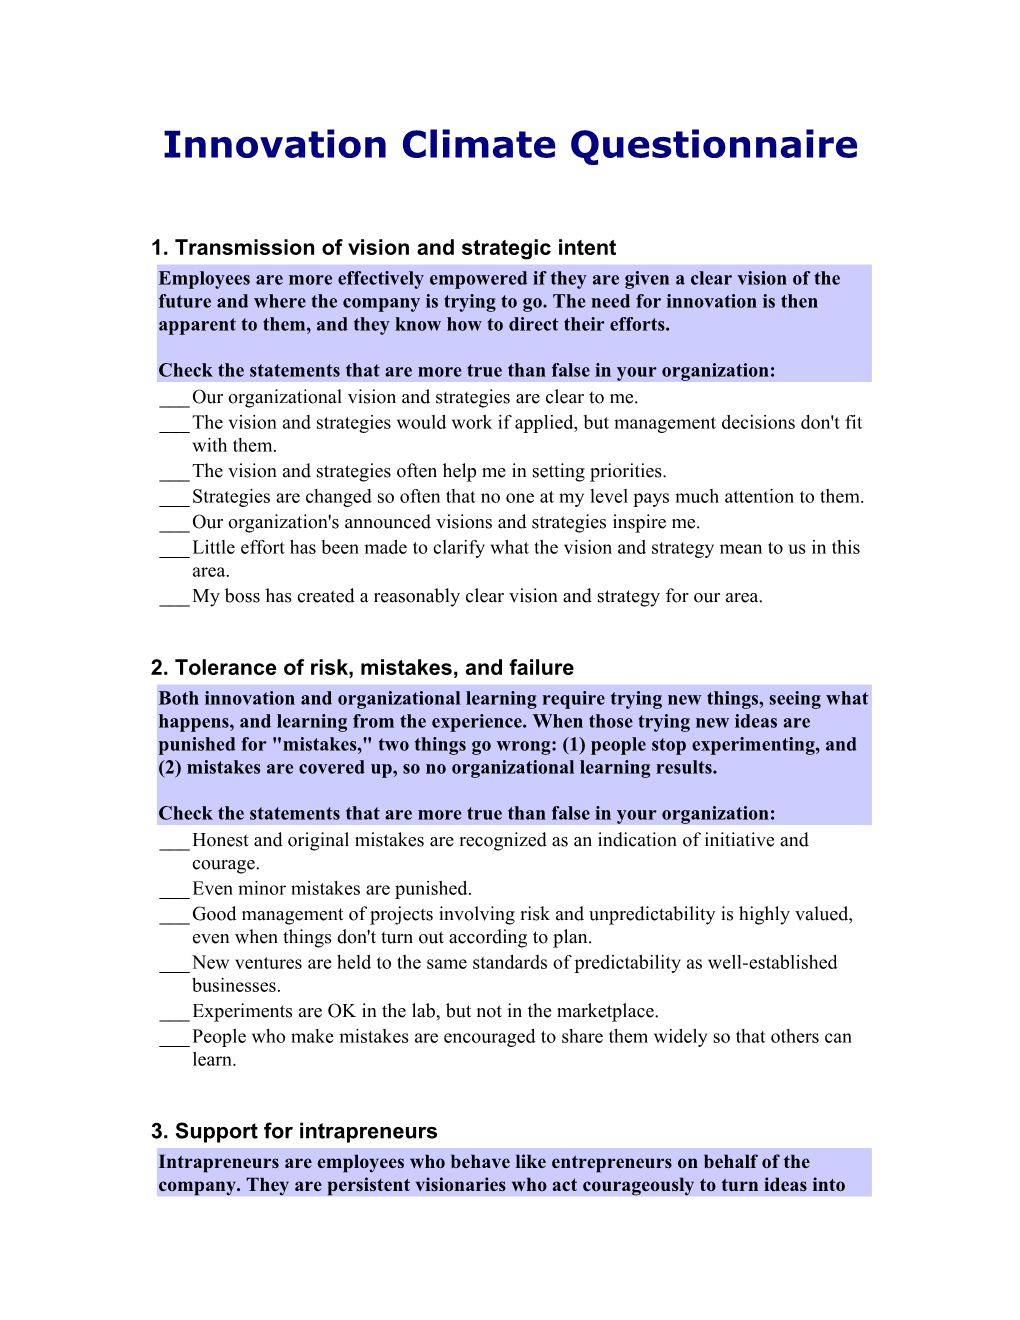 Innovation Climate Questionnaire